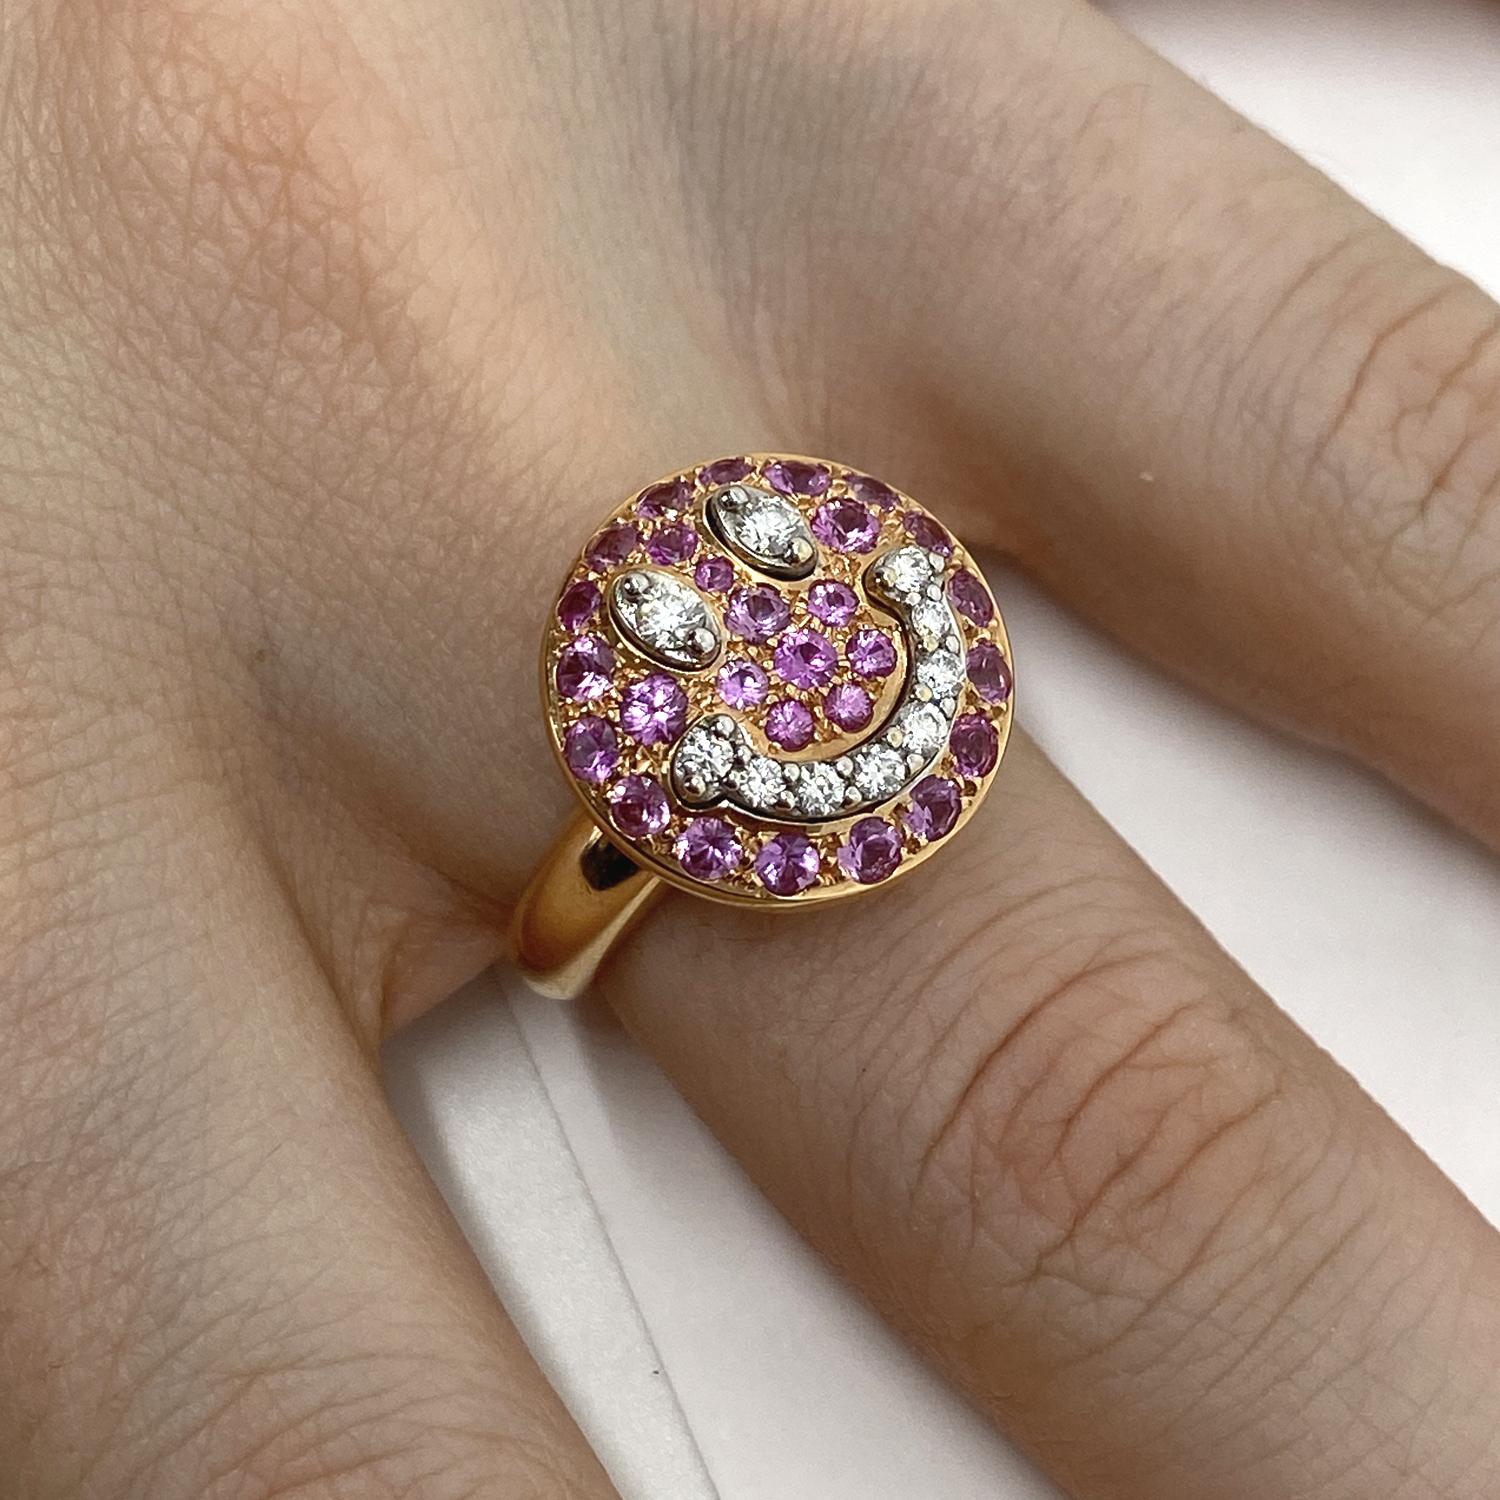 Ring made of 18 kt rose gold with smile theme in natural pink brilliant-cut sapphires for ct.1.20 and natural white brilliant-cut diamonds for ct.0.25

Welcome to our jewelry collection, where every piece tells a story of timeless elegance and